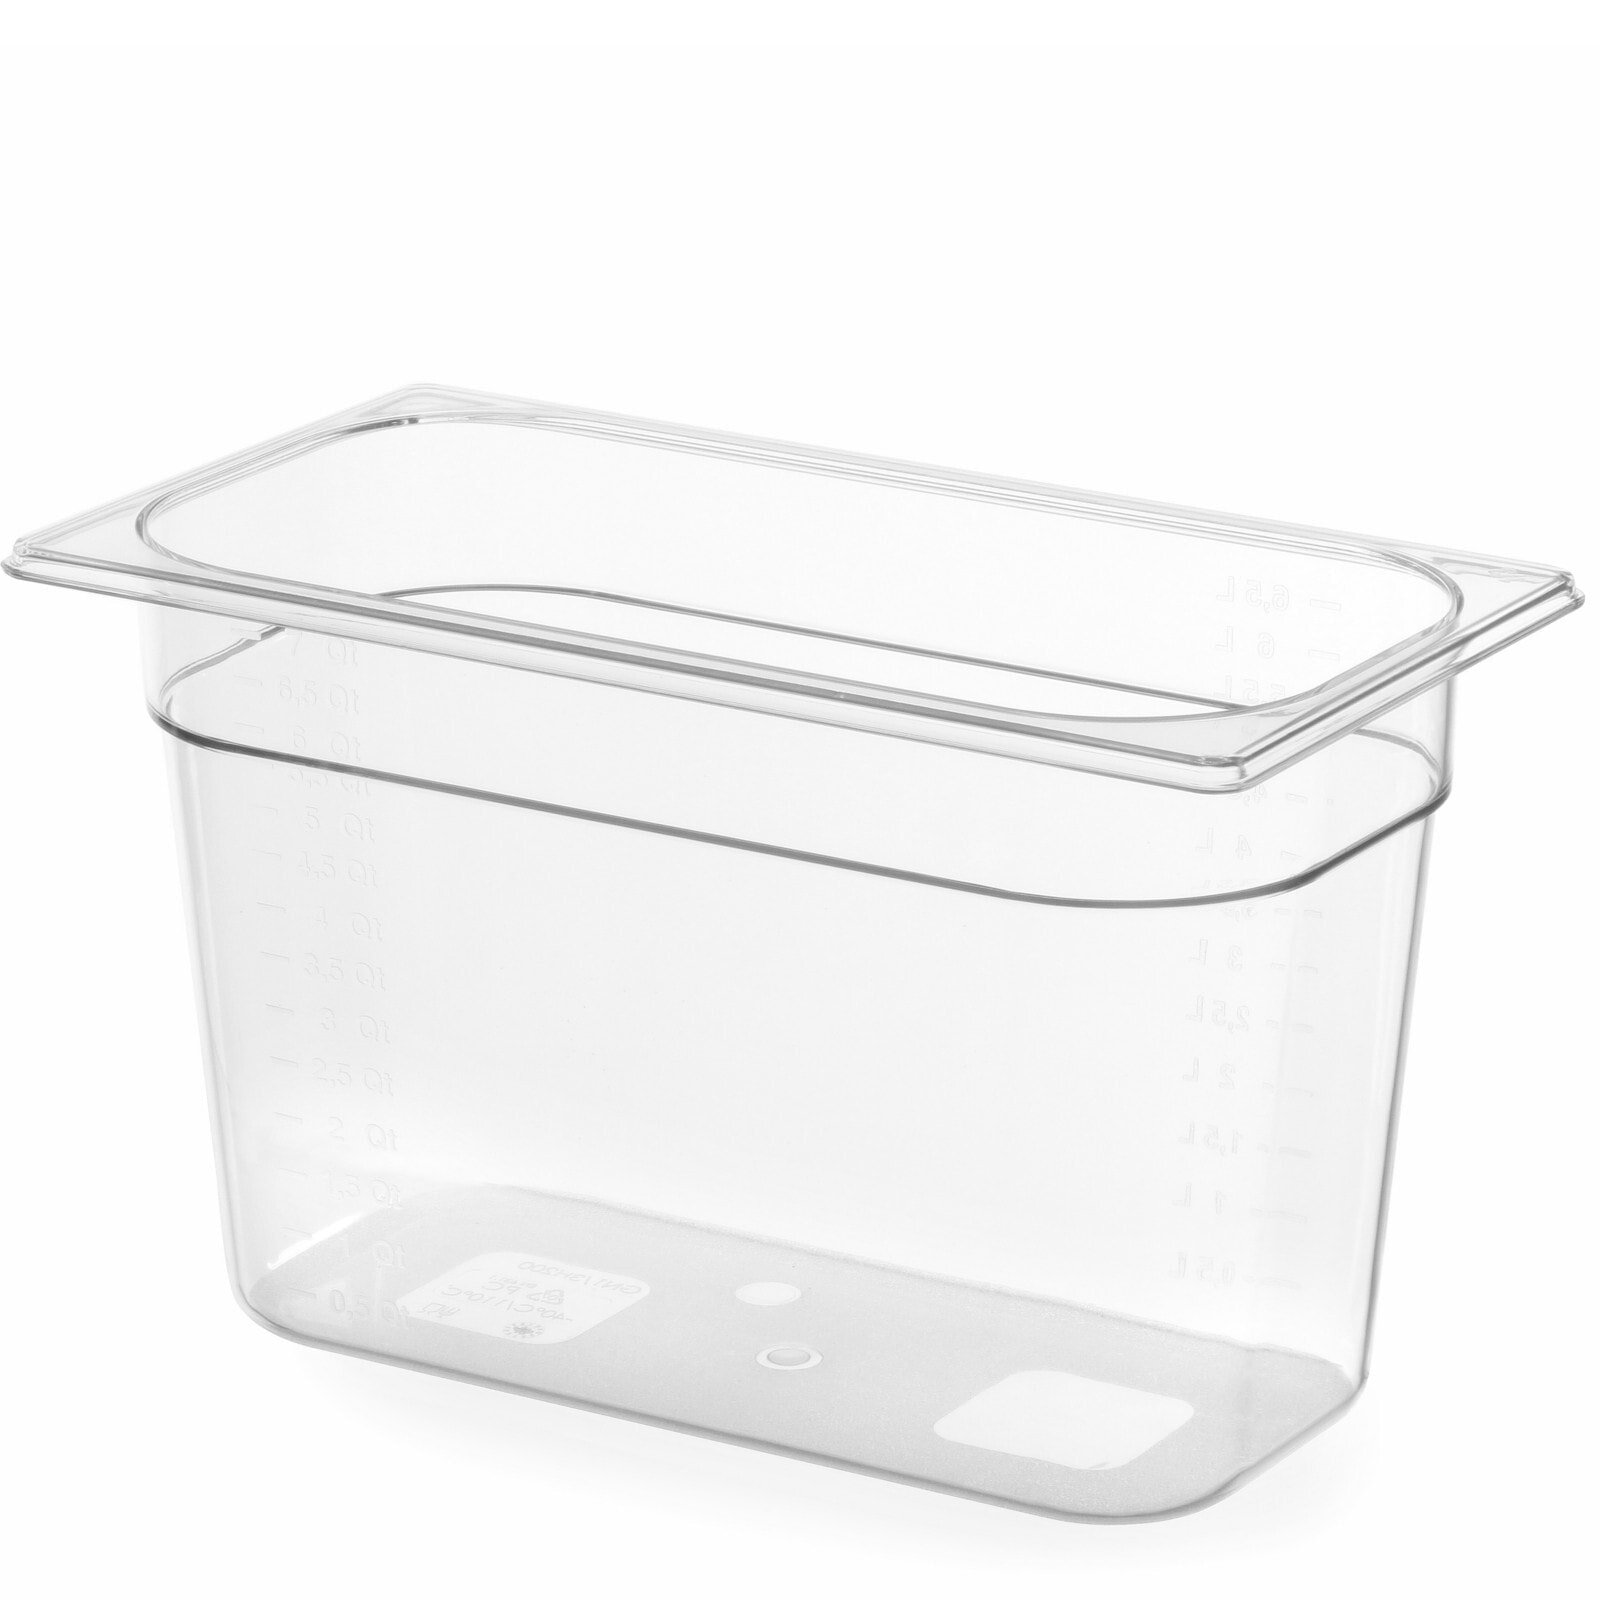 Transparent GN container made of polycarbonate GN 1/3 height 65 mm - Hendi 861530